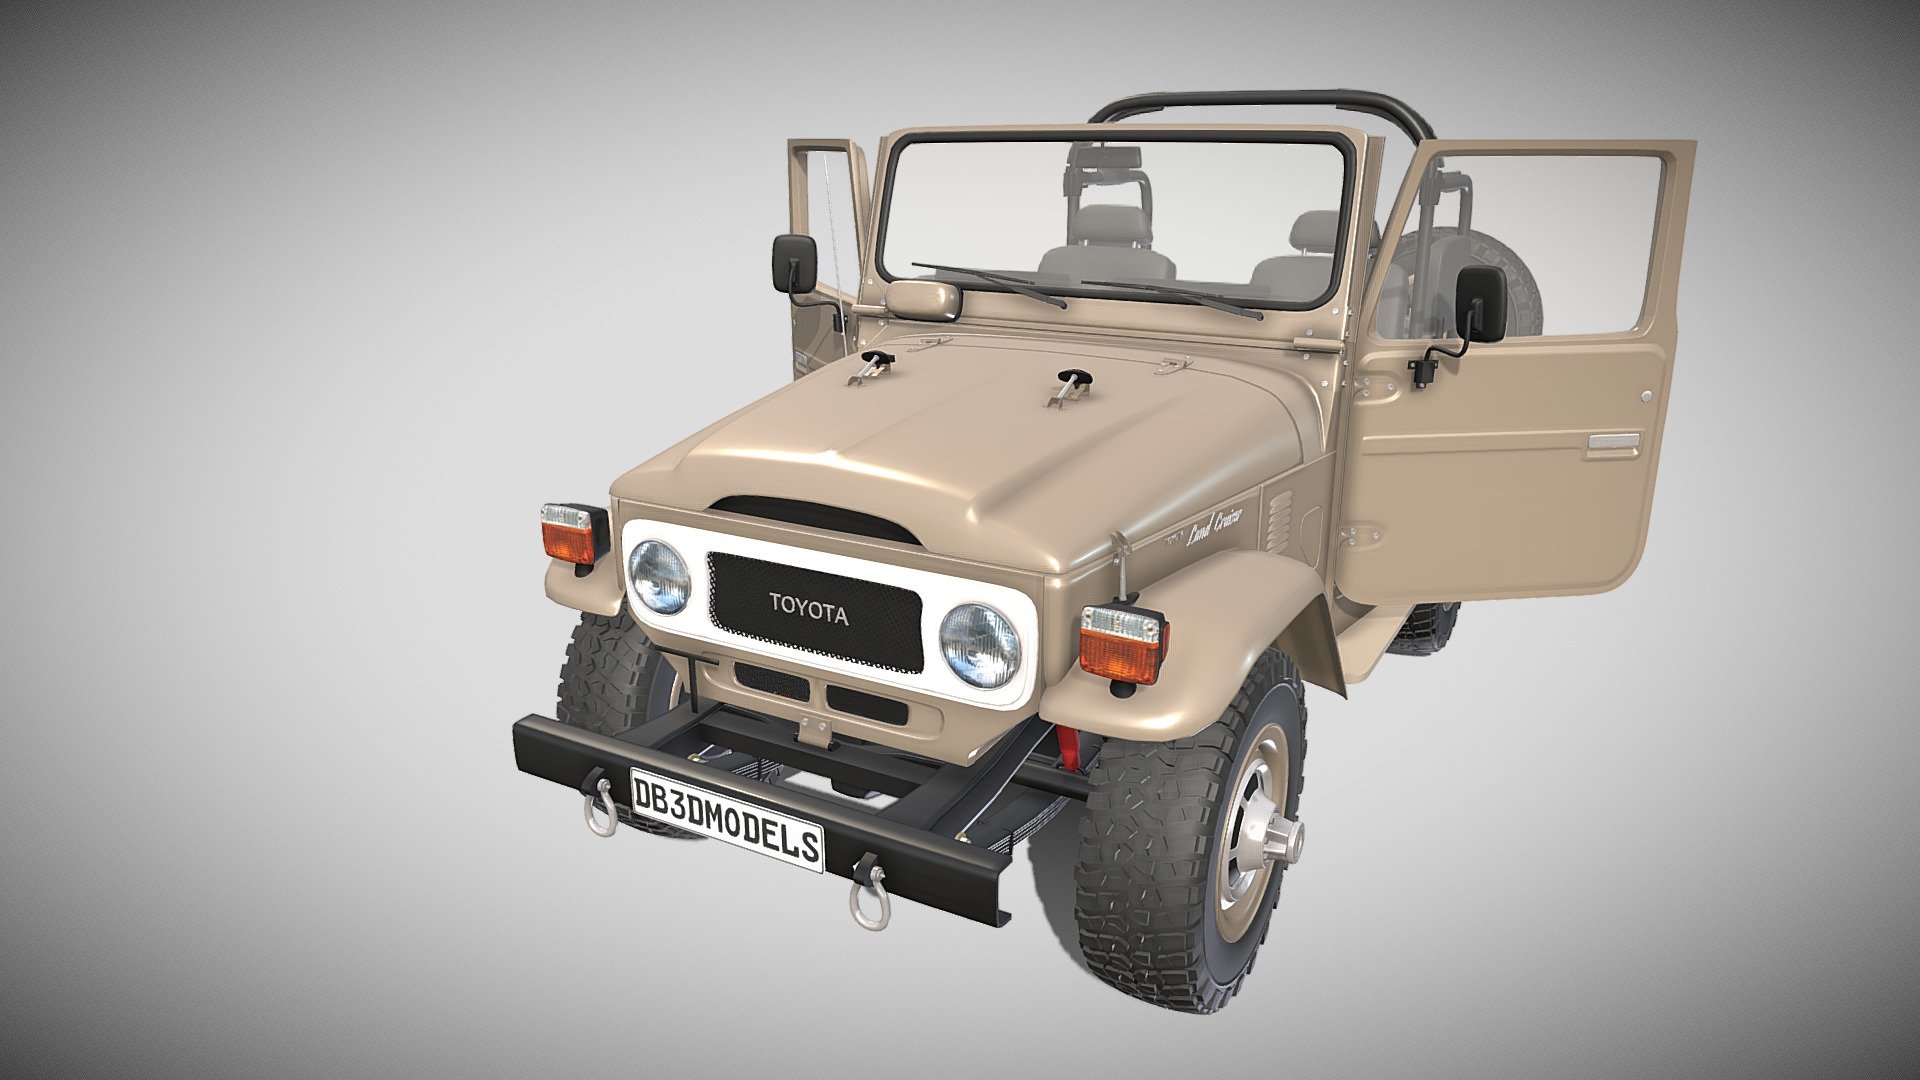 A very accurate model of the Toyota Land Cruiser FJ-40, with a highly detailed interior.

File formats:
-.blend, rendered with cycles, as seen in the images;
-.blend, rendered with cycles, with doors open, as seen in images;
-.obj, with materials applied and textures;
-.obj, with materials applied and textures and doors open;
-.dae, with materials applied and textures;
-.dae, with materials applied and textures and doors open;
-.fbx, with material slots applied;
-.fbx, with material slots applied and doors open;
-.stl;
-.stl with doors open;

3D Software:
This 3d model was originally created in Blender 2.79 and rendered with Cycles.

Materials and textures:
The model has materials applied in all formats, and is ready to import and render.
The model comes with multiple png image textures.

Preview scenes:
The preview images are rendered in Blender using its built-in render engine &lsquo;Cycles' 3d model